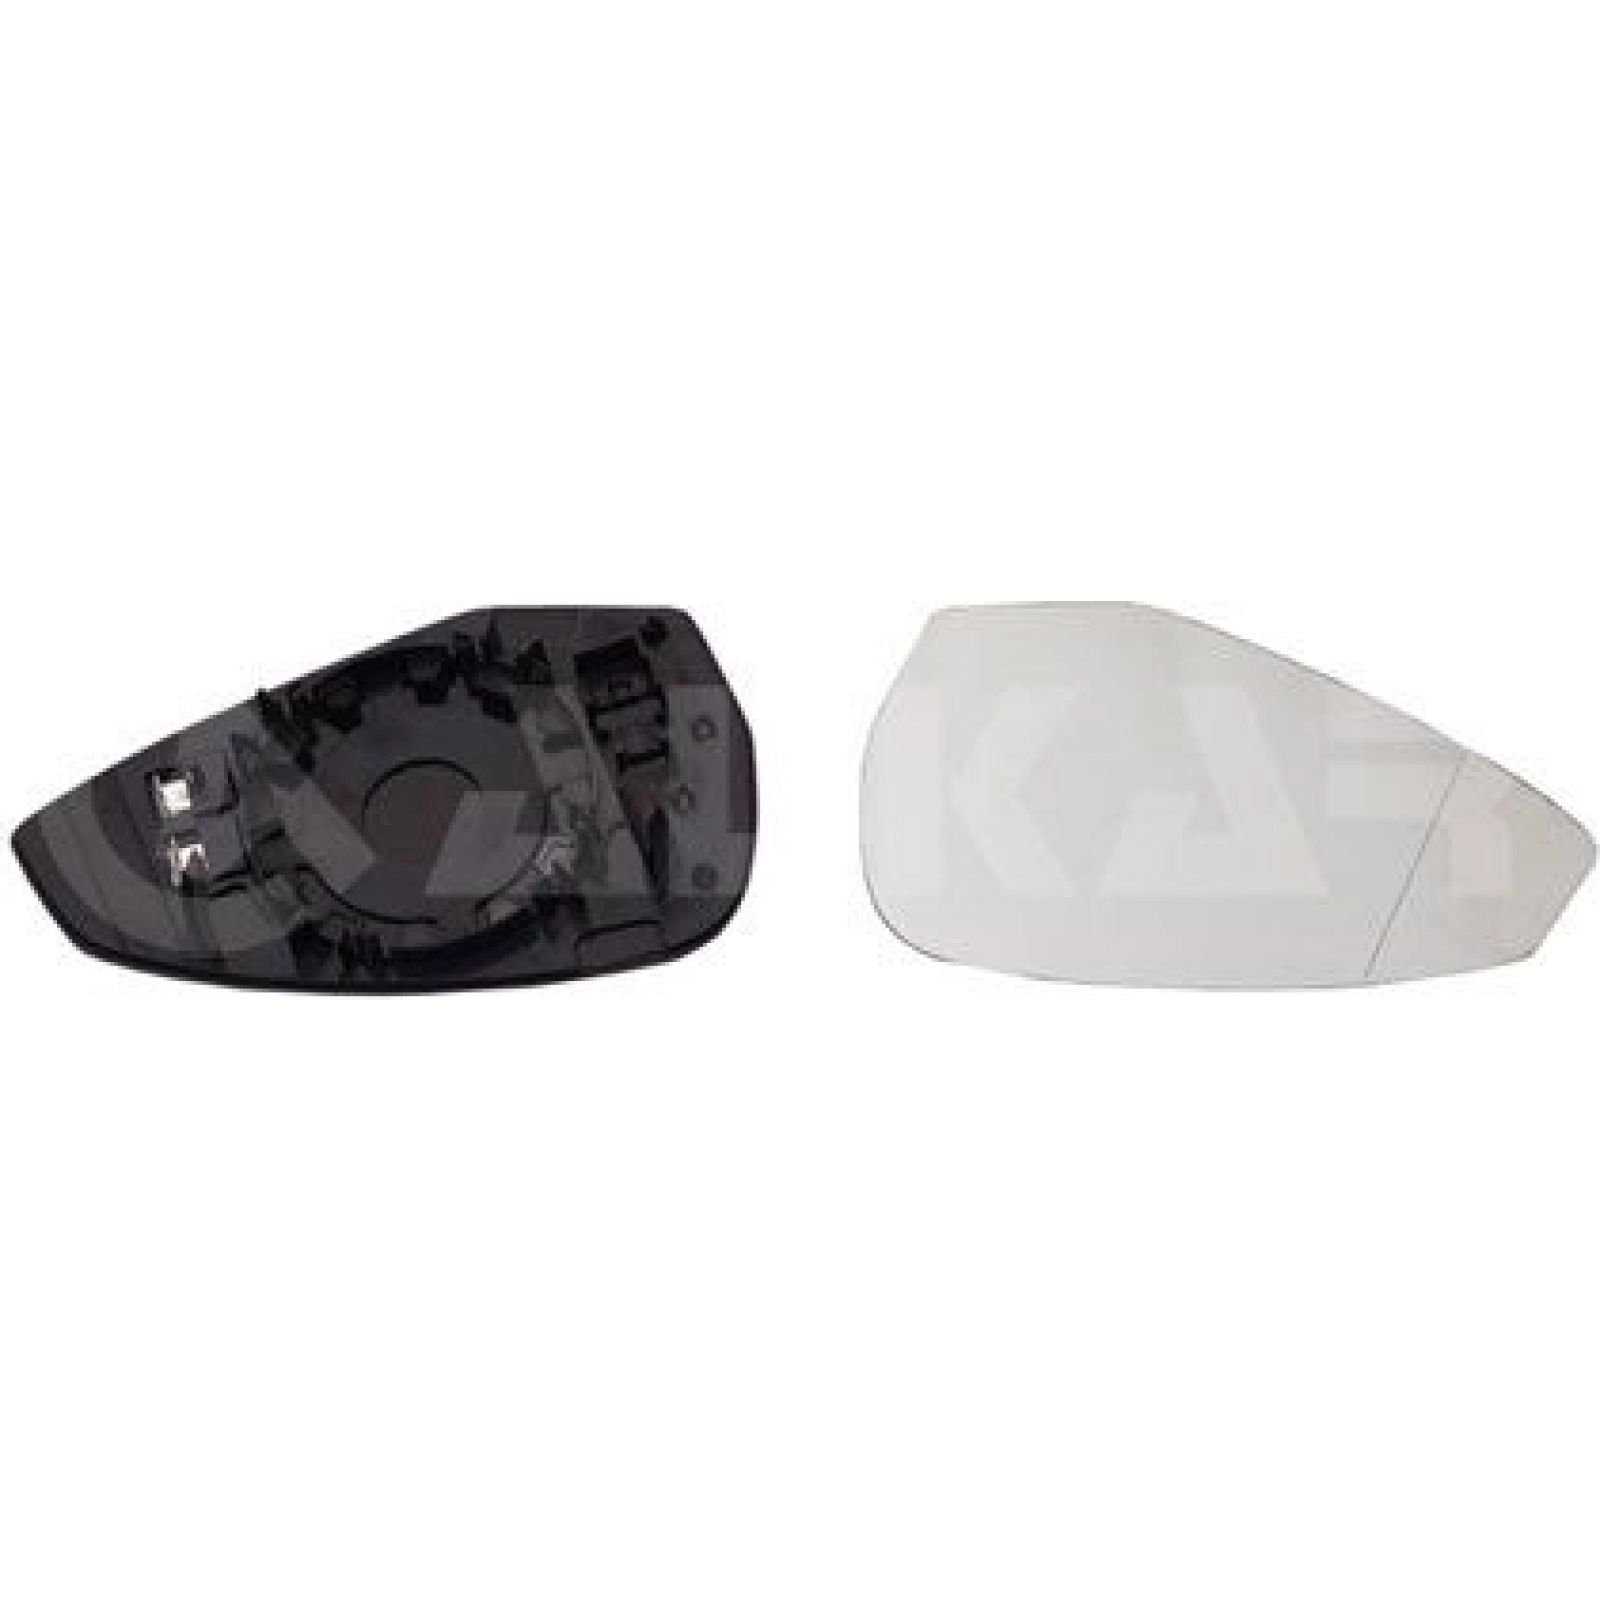 https://www.autoteile-store.at/img/product/spiegelglas-r-el-vers-hzb-asph-audi-a4-8w-515-ad0267523-160738/bc9182bff6e6b94c1db1251759024a66_1600.jpg